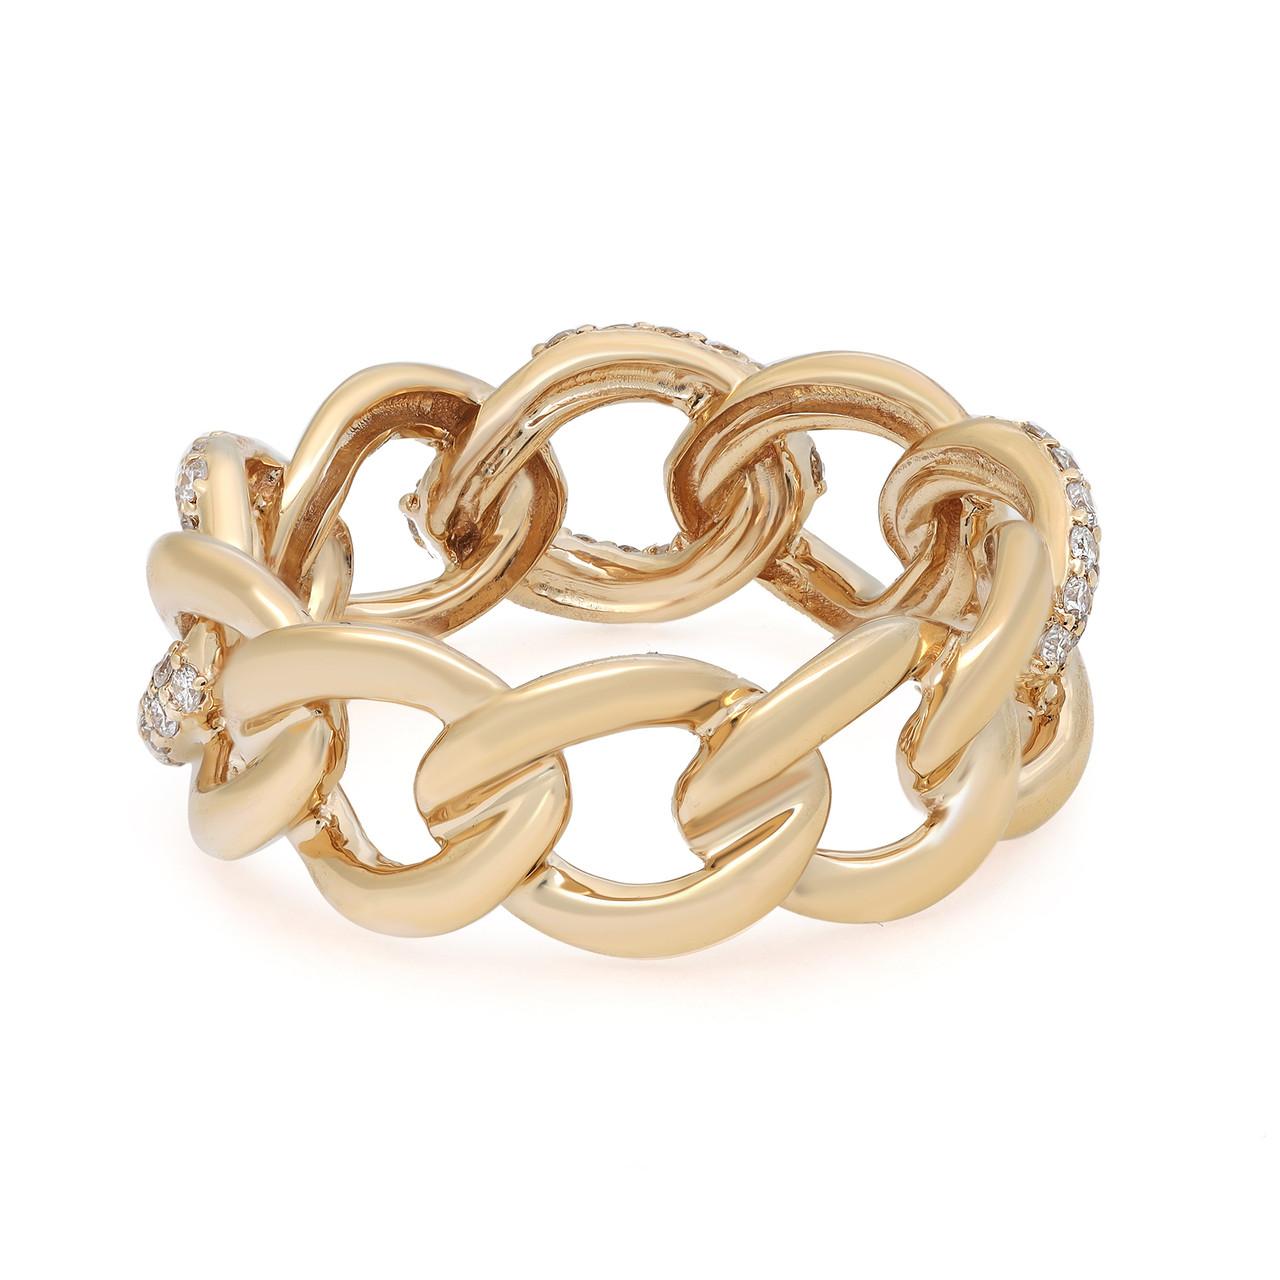 Introducing our chic 0.50 Carat Diamond Chain Link Ring in luxurious 18K Yellow Gold. This stunning ring combines modern aesthetics with timeless elegance, featuring a half-carat of brilliant diamonds intricately set within stylish chain